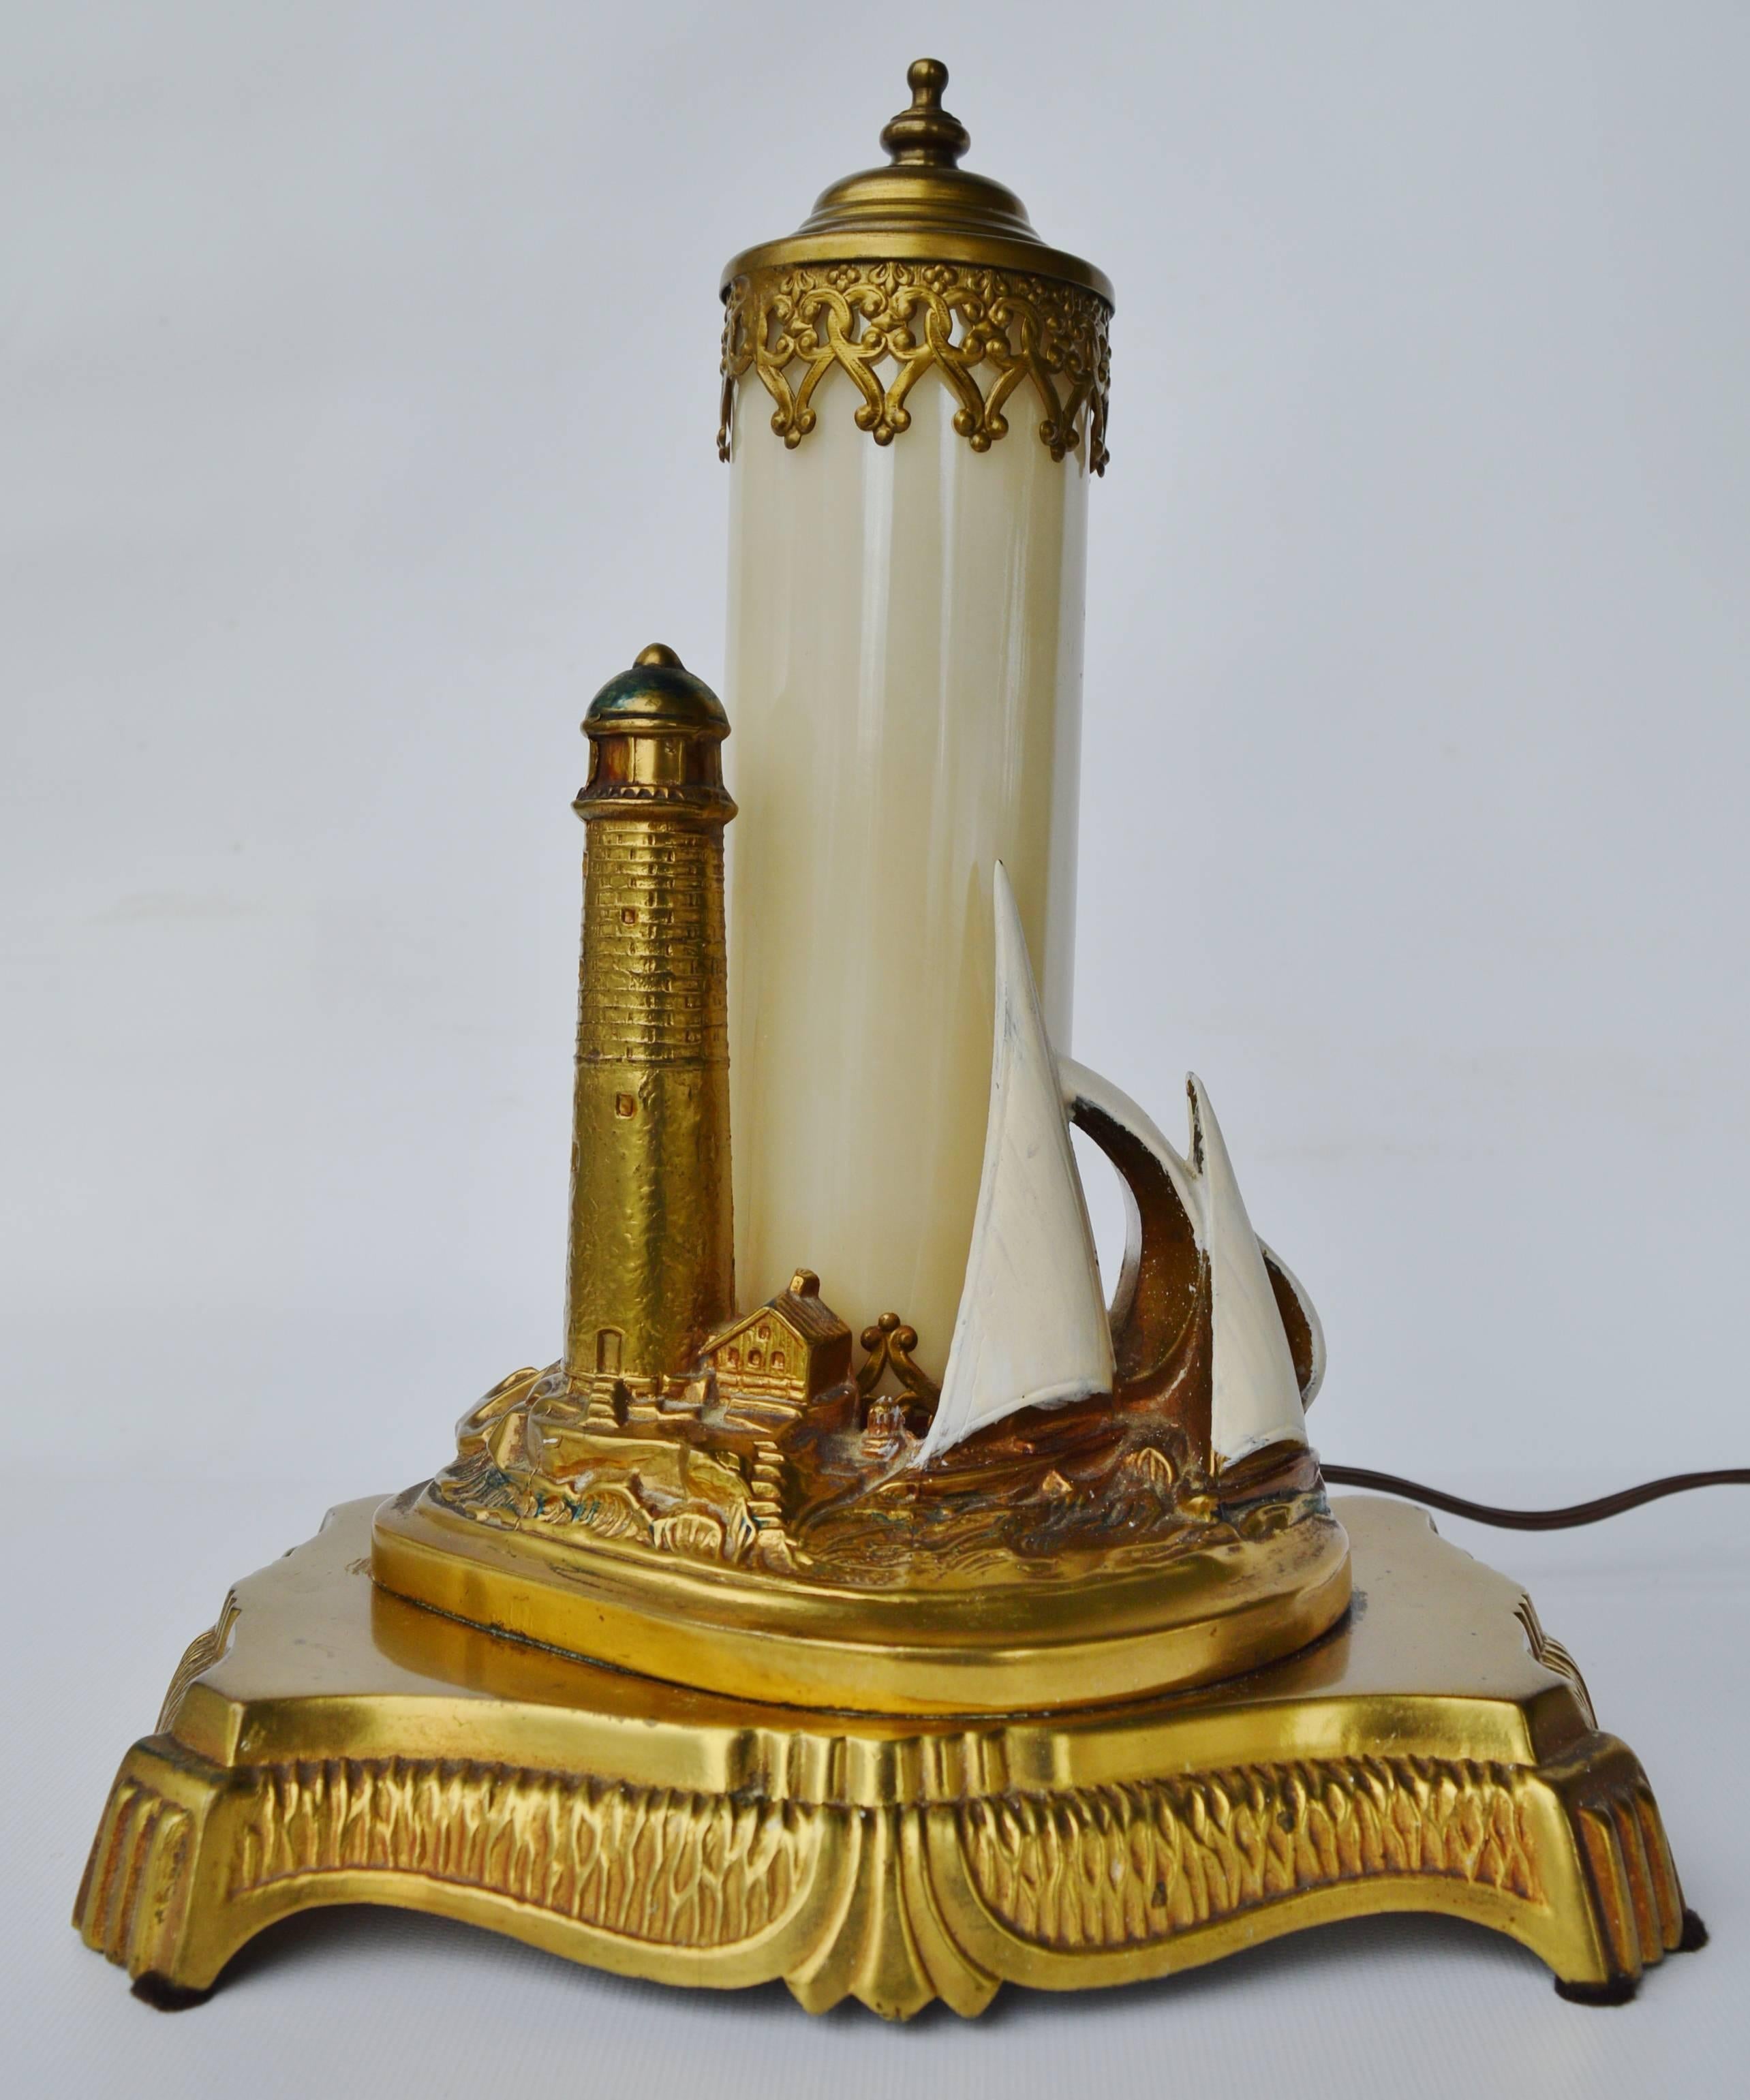 This amazing antique brass Art Deco table lamp is so detailed! Featuring a scene of a rocky shore line with light house, an out building, sailboats, crashing waves, and an anchor, with a pearl colored opalescent glass cylinder light with detailed